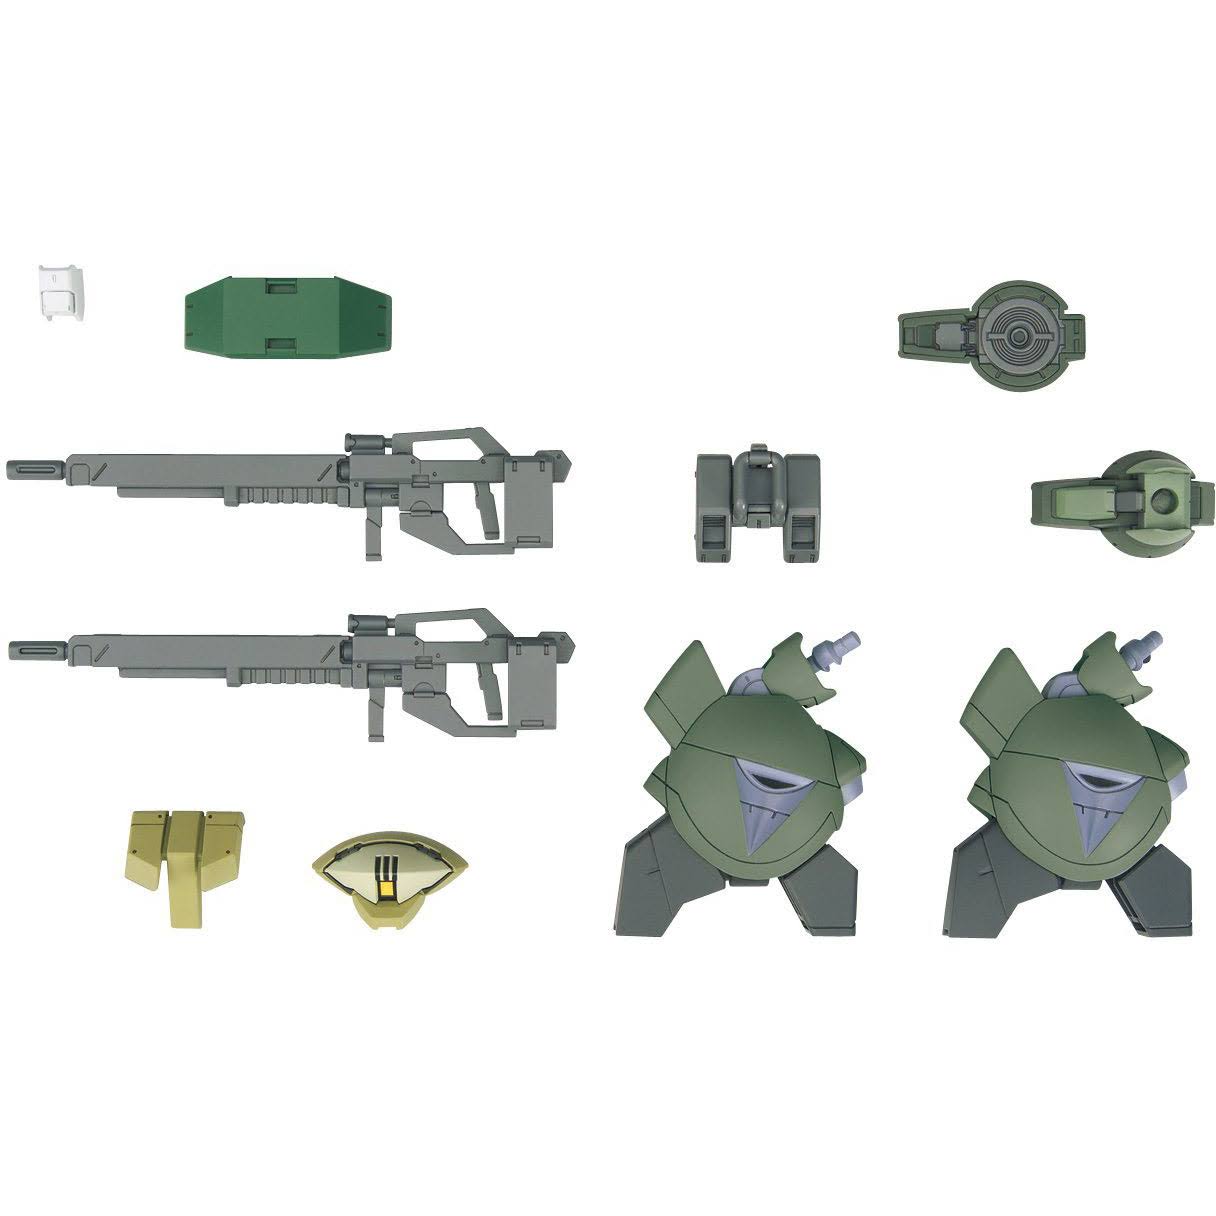 Bandai Gundam High Grade Iron-blooded Arms Accessories Model Kit - #009 Mobile Suit Option Set 9, 1:144 Scale